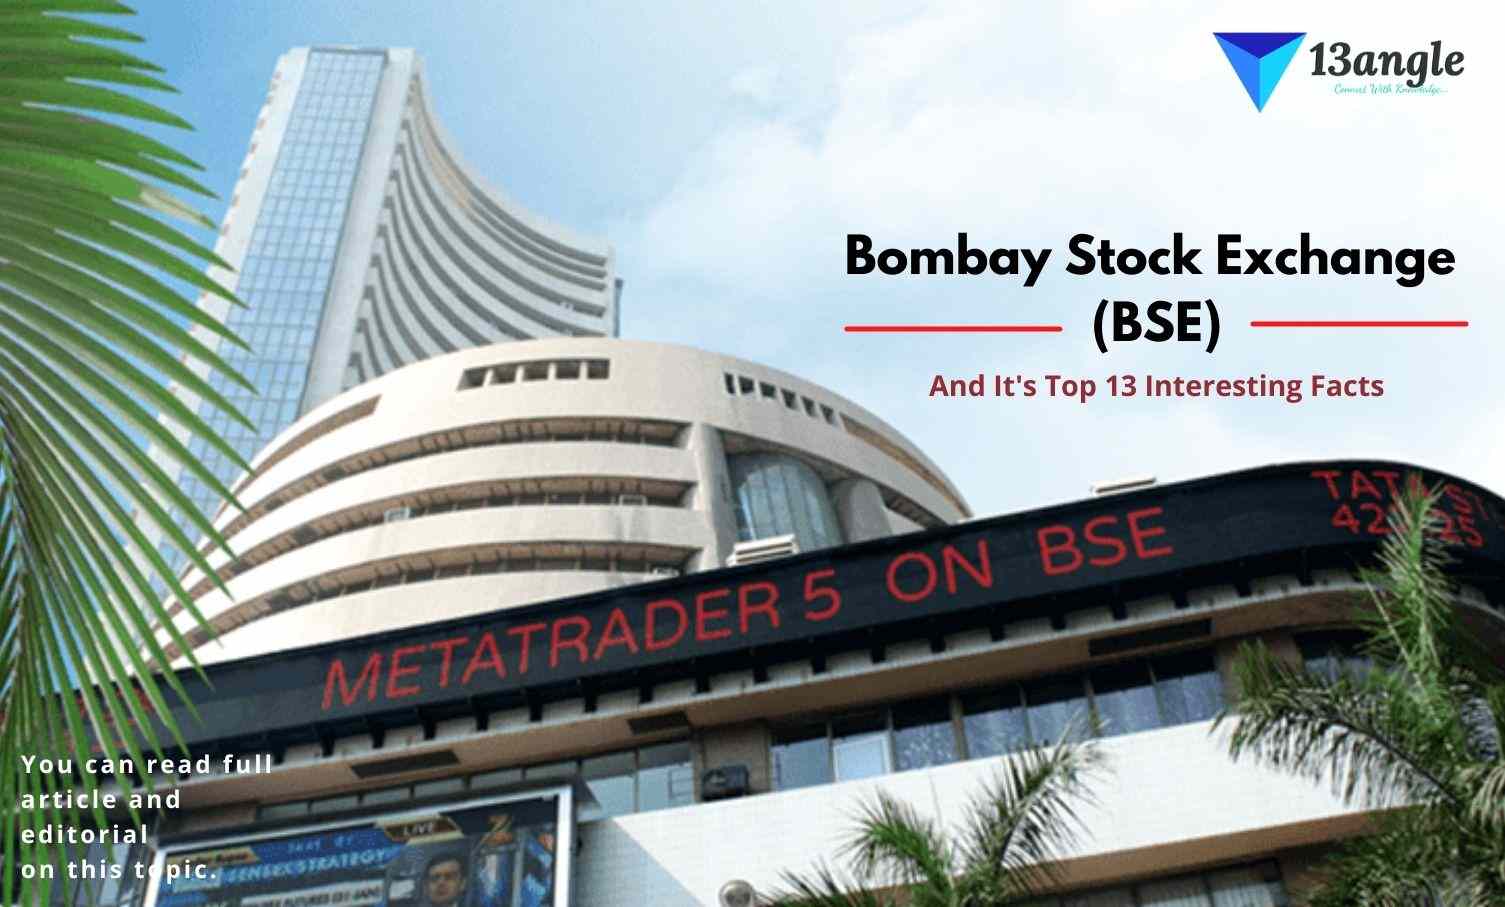 Bombay Stock Exchange (BSE) And It's Top 13 Interesting Facts- 13angle.com